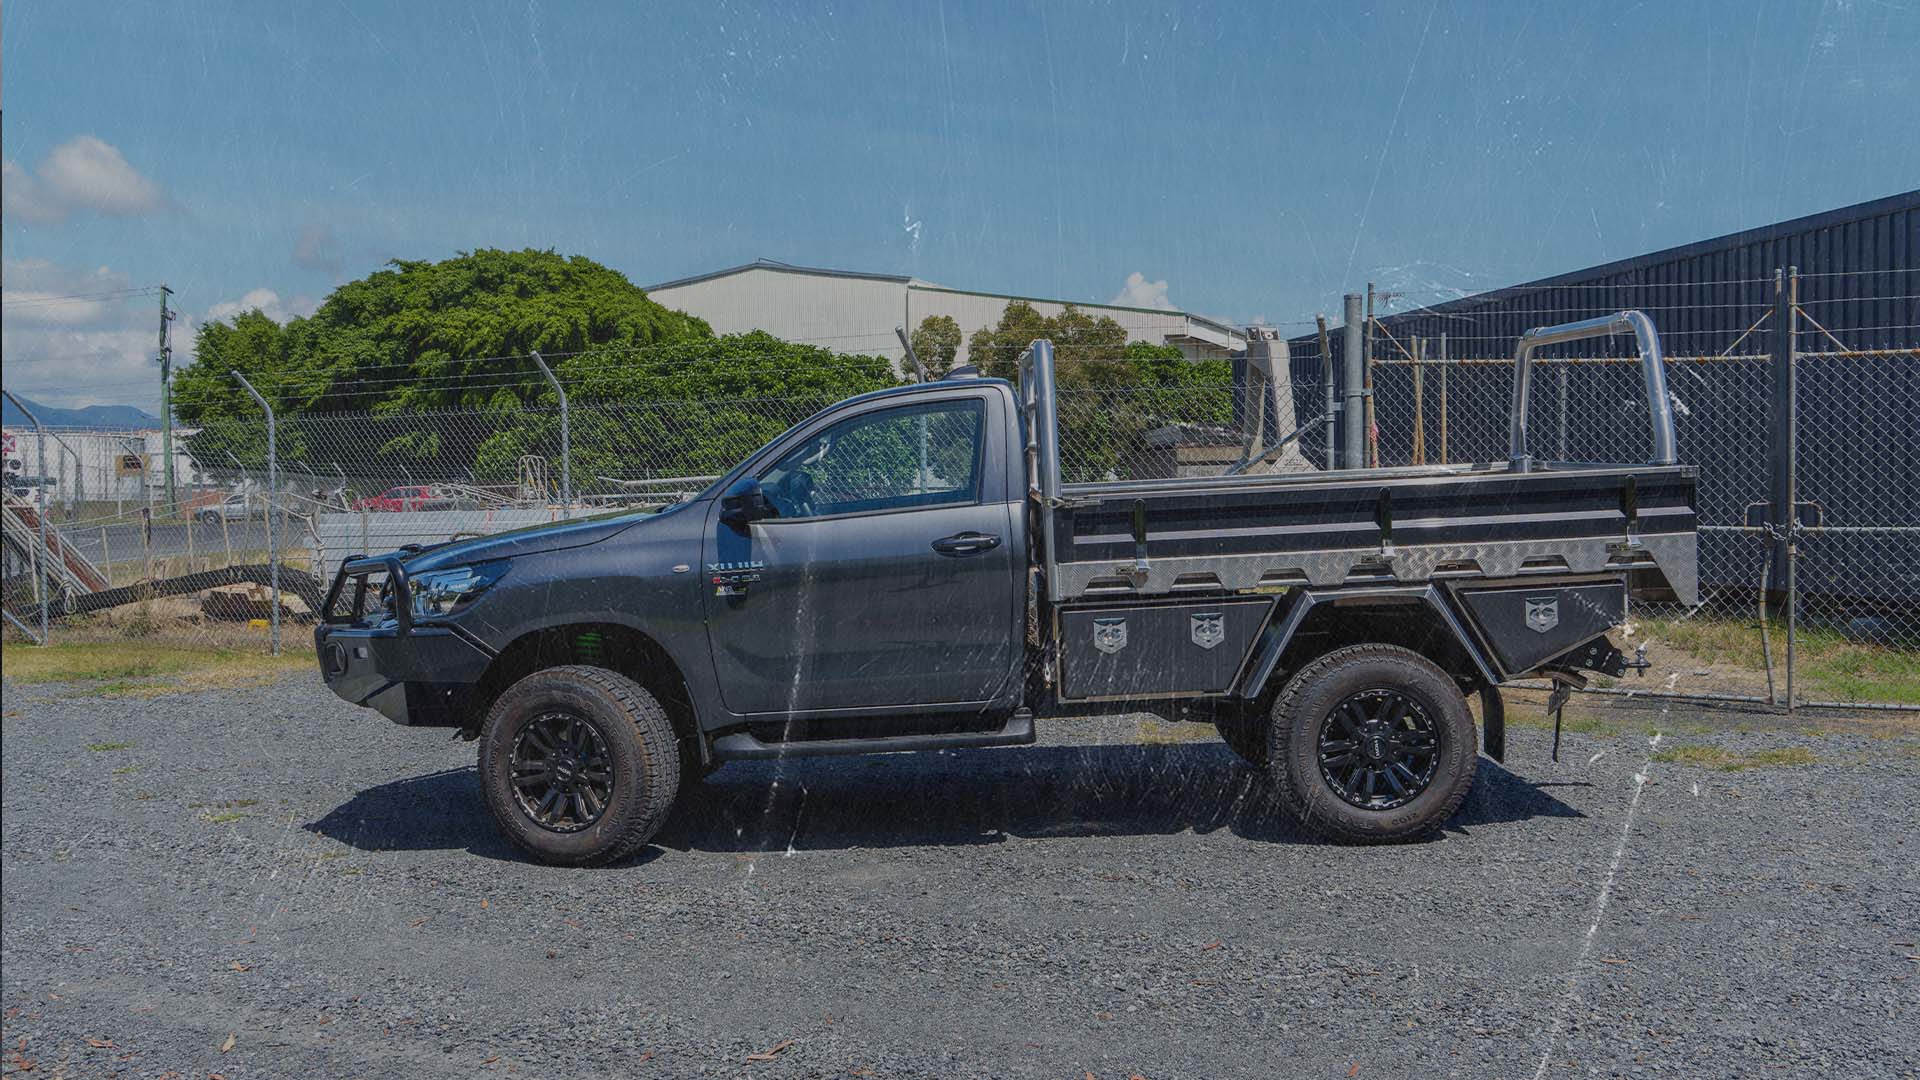 This is a Toyota HIlux with a Heavy Duty Aluminium Ute Tray